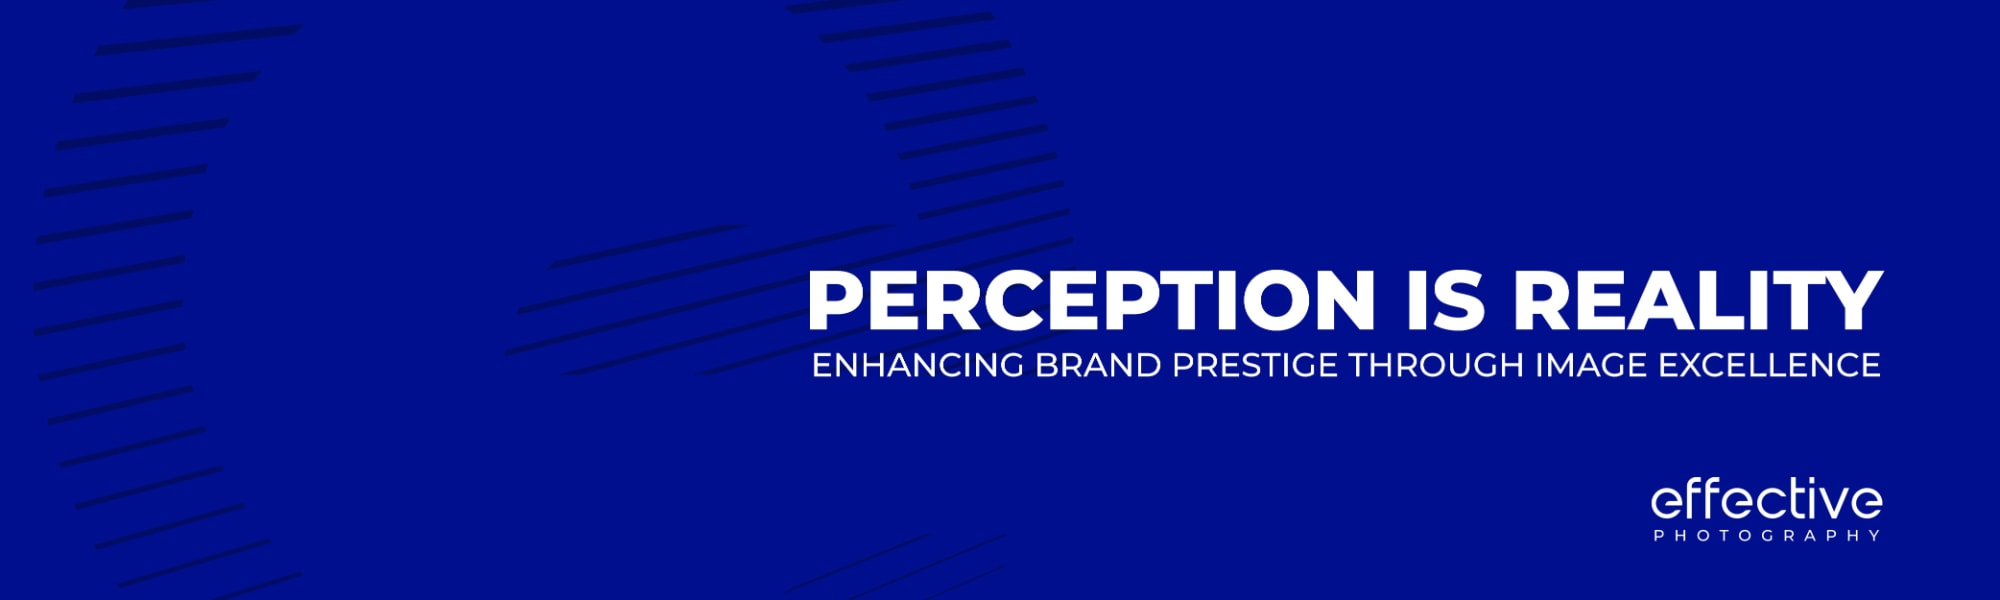 Perception is Reality Enhancing Brand Prestige Through Image Excellence